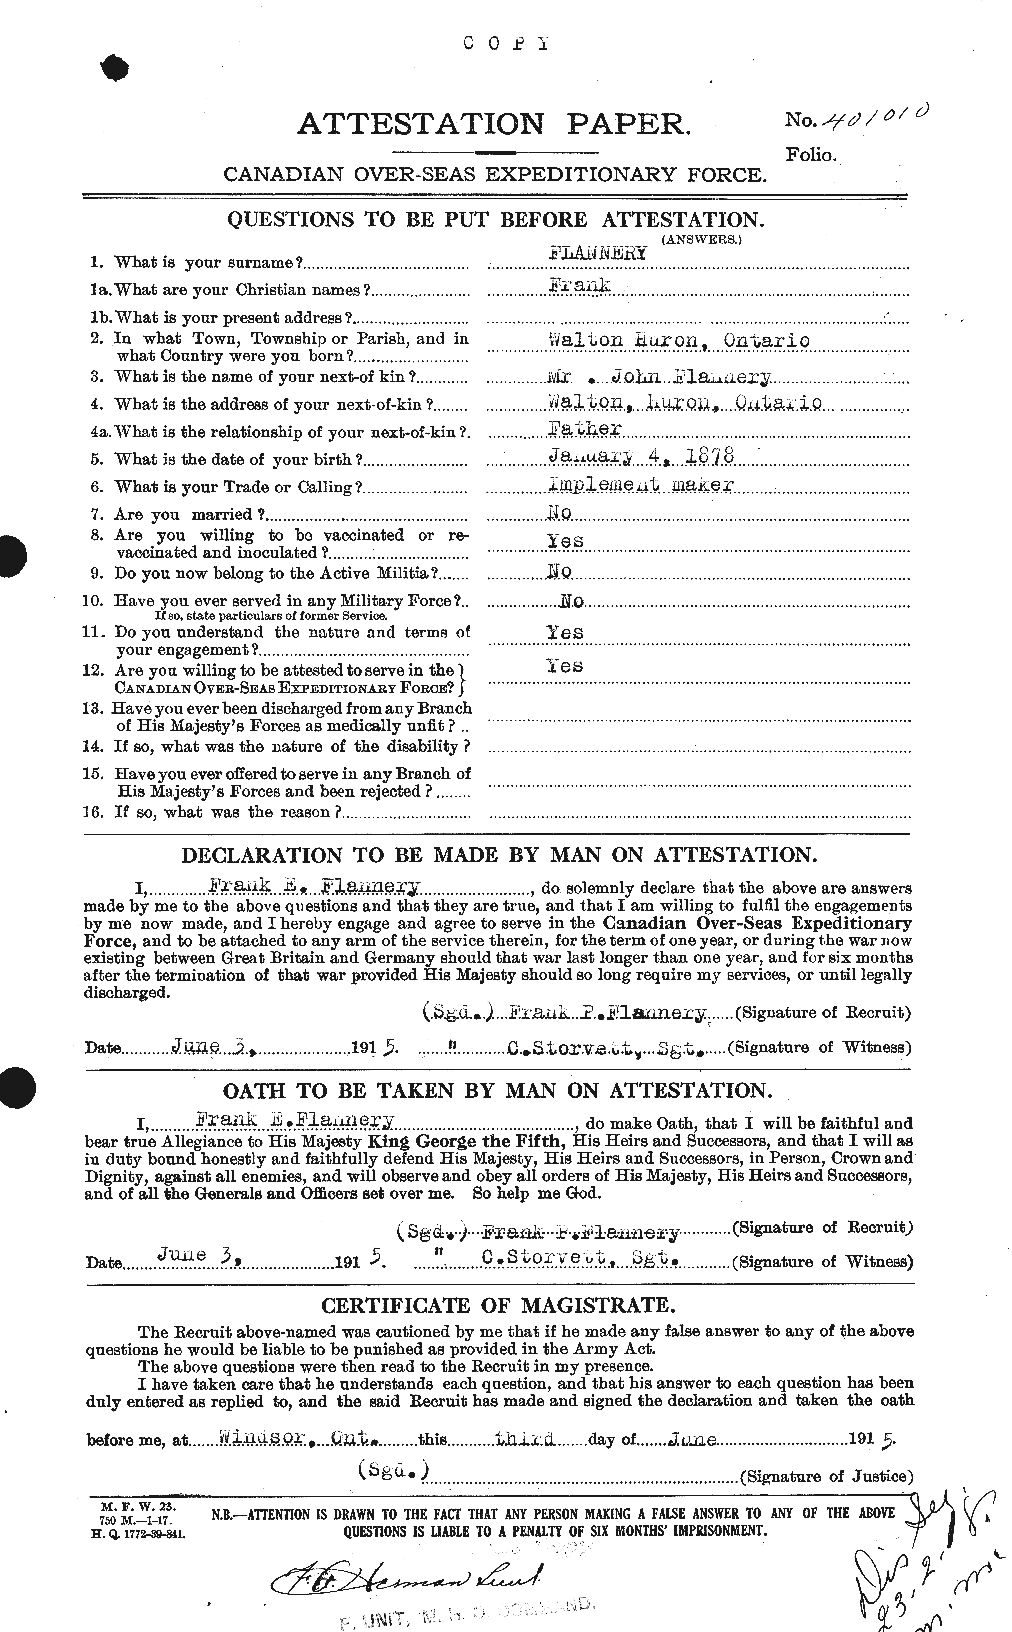 Personnel Records of the First World War - CEF 326188a